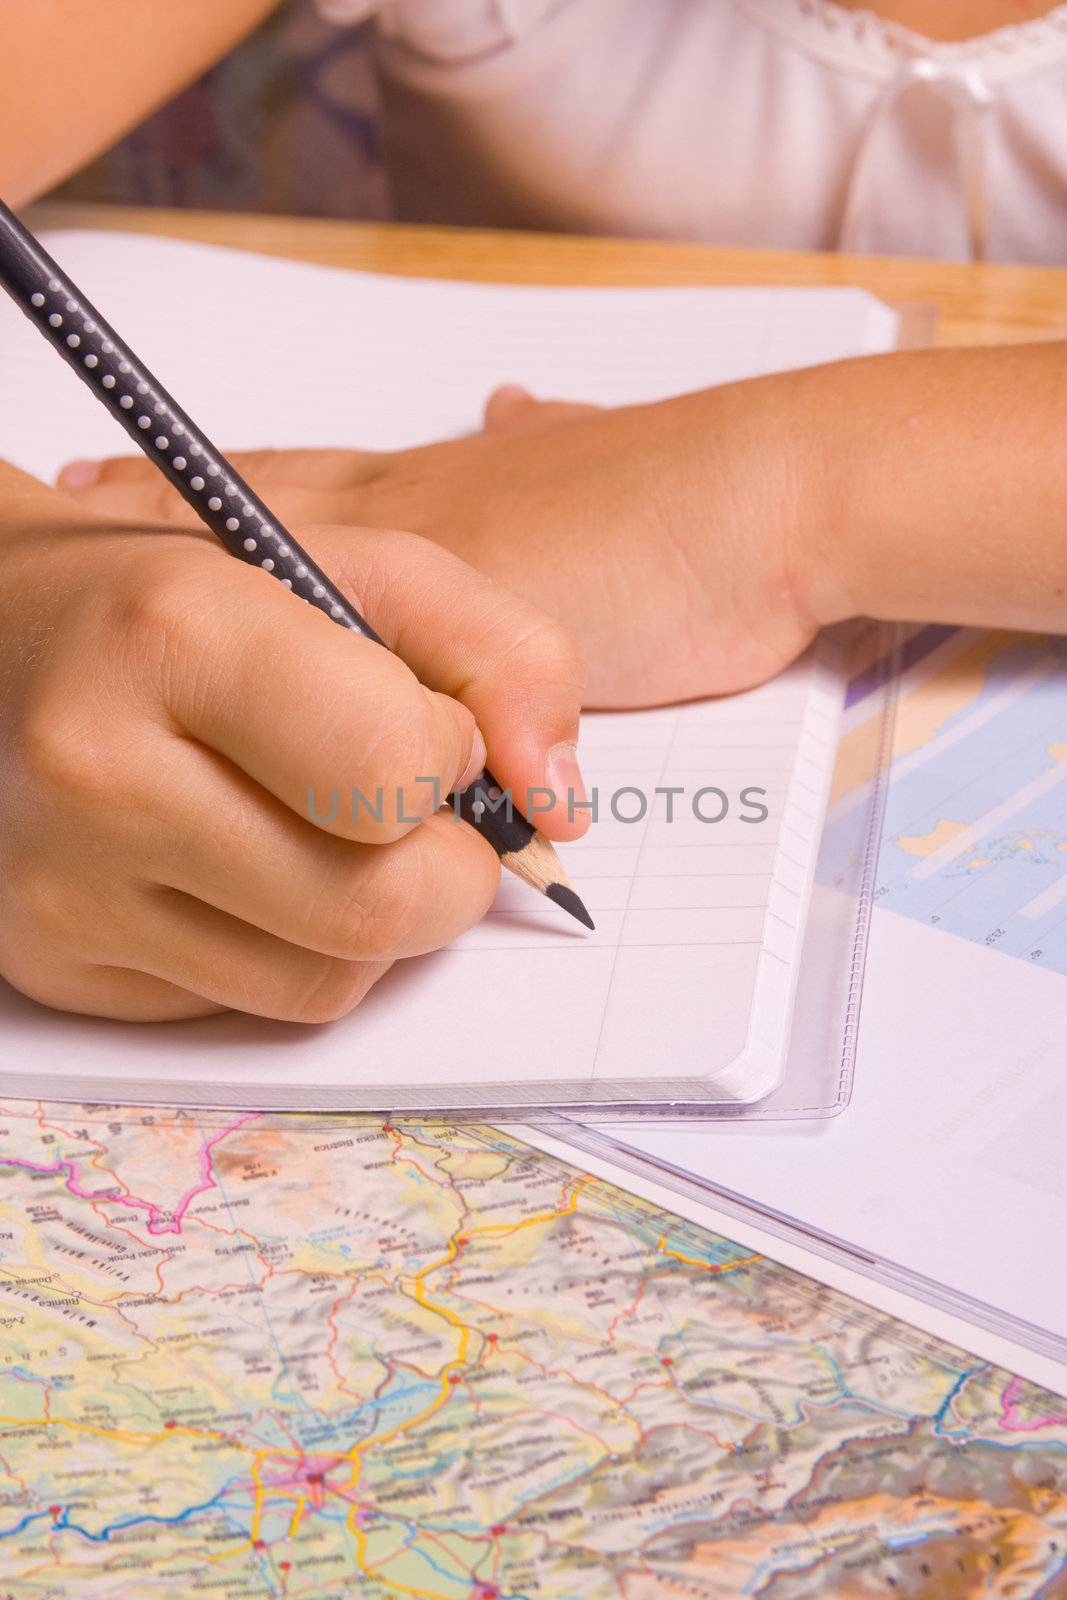 Girl doing her homework by writing in notebook.